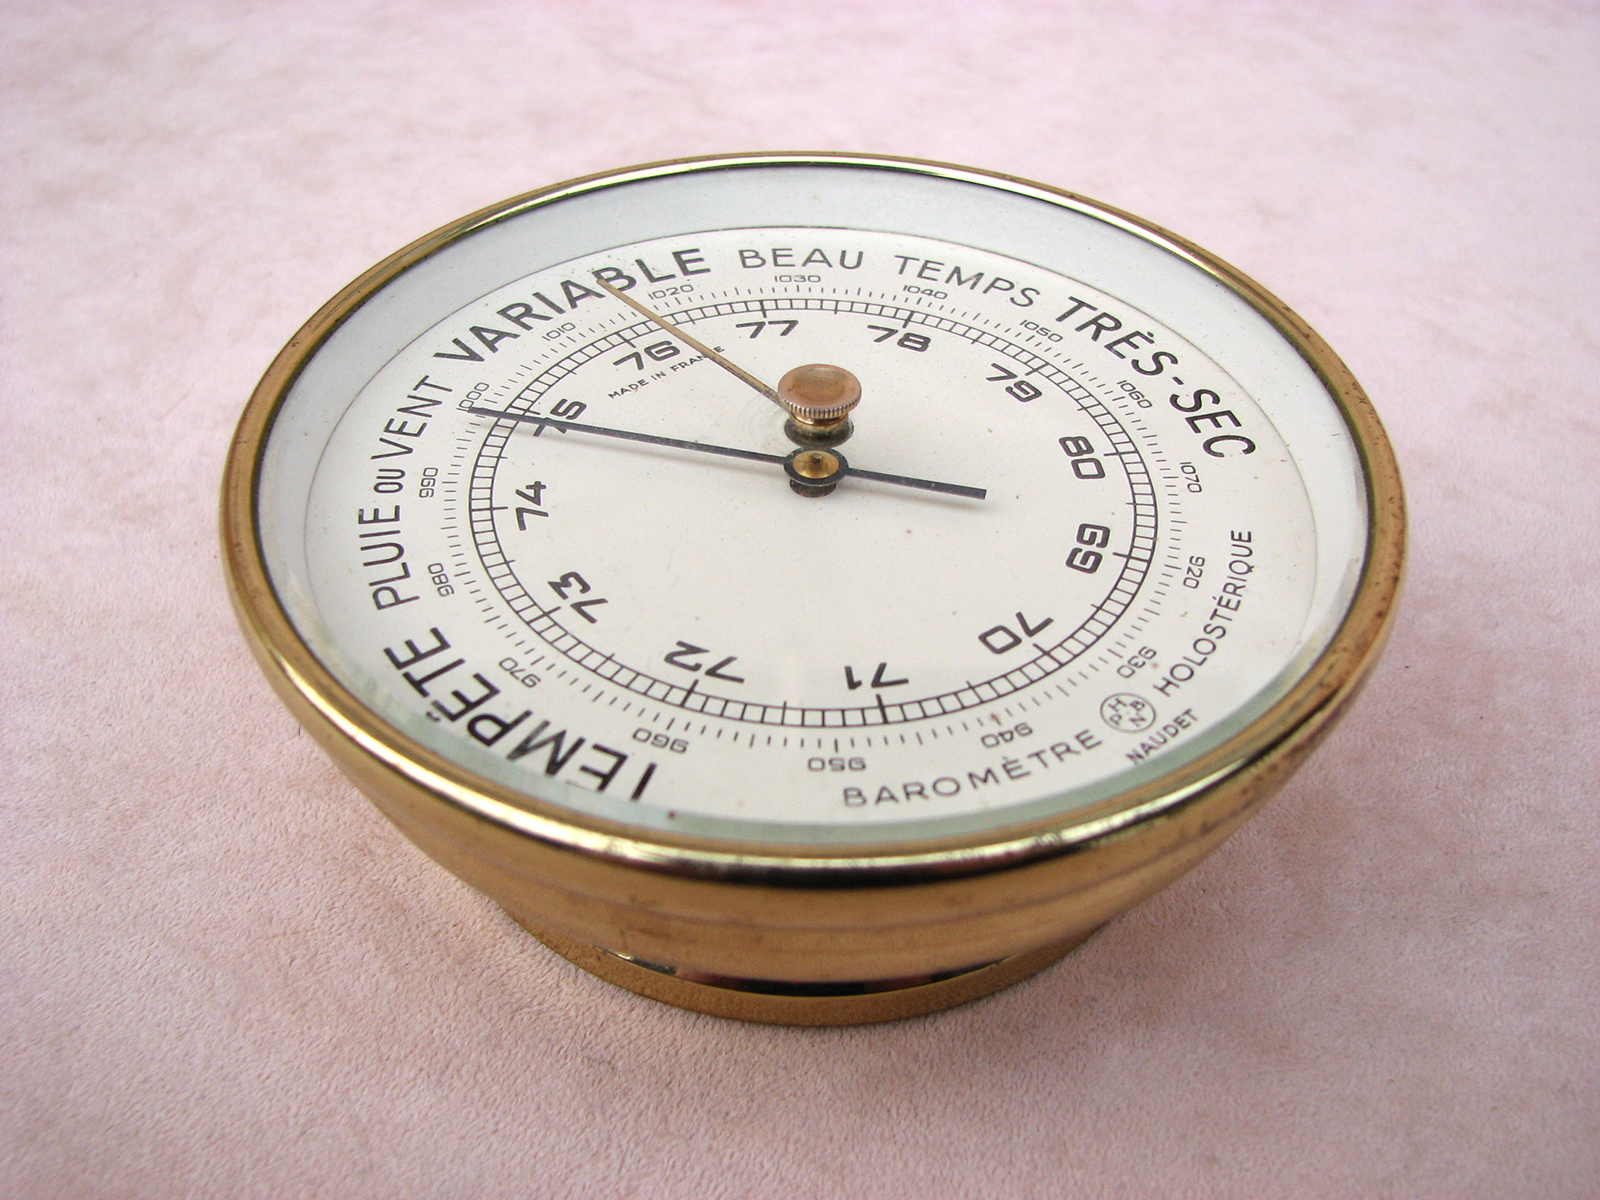 PHBN French ships style brass holosteric barometer